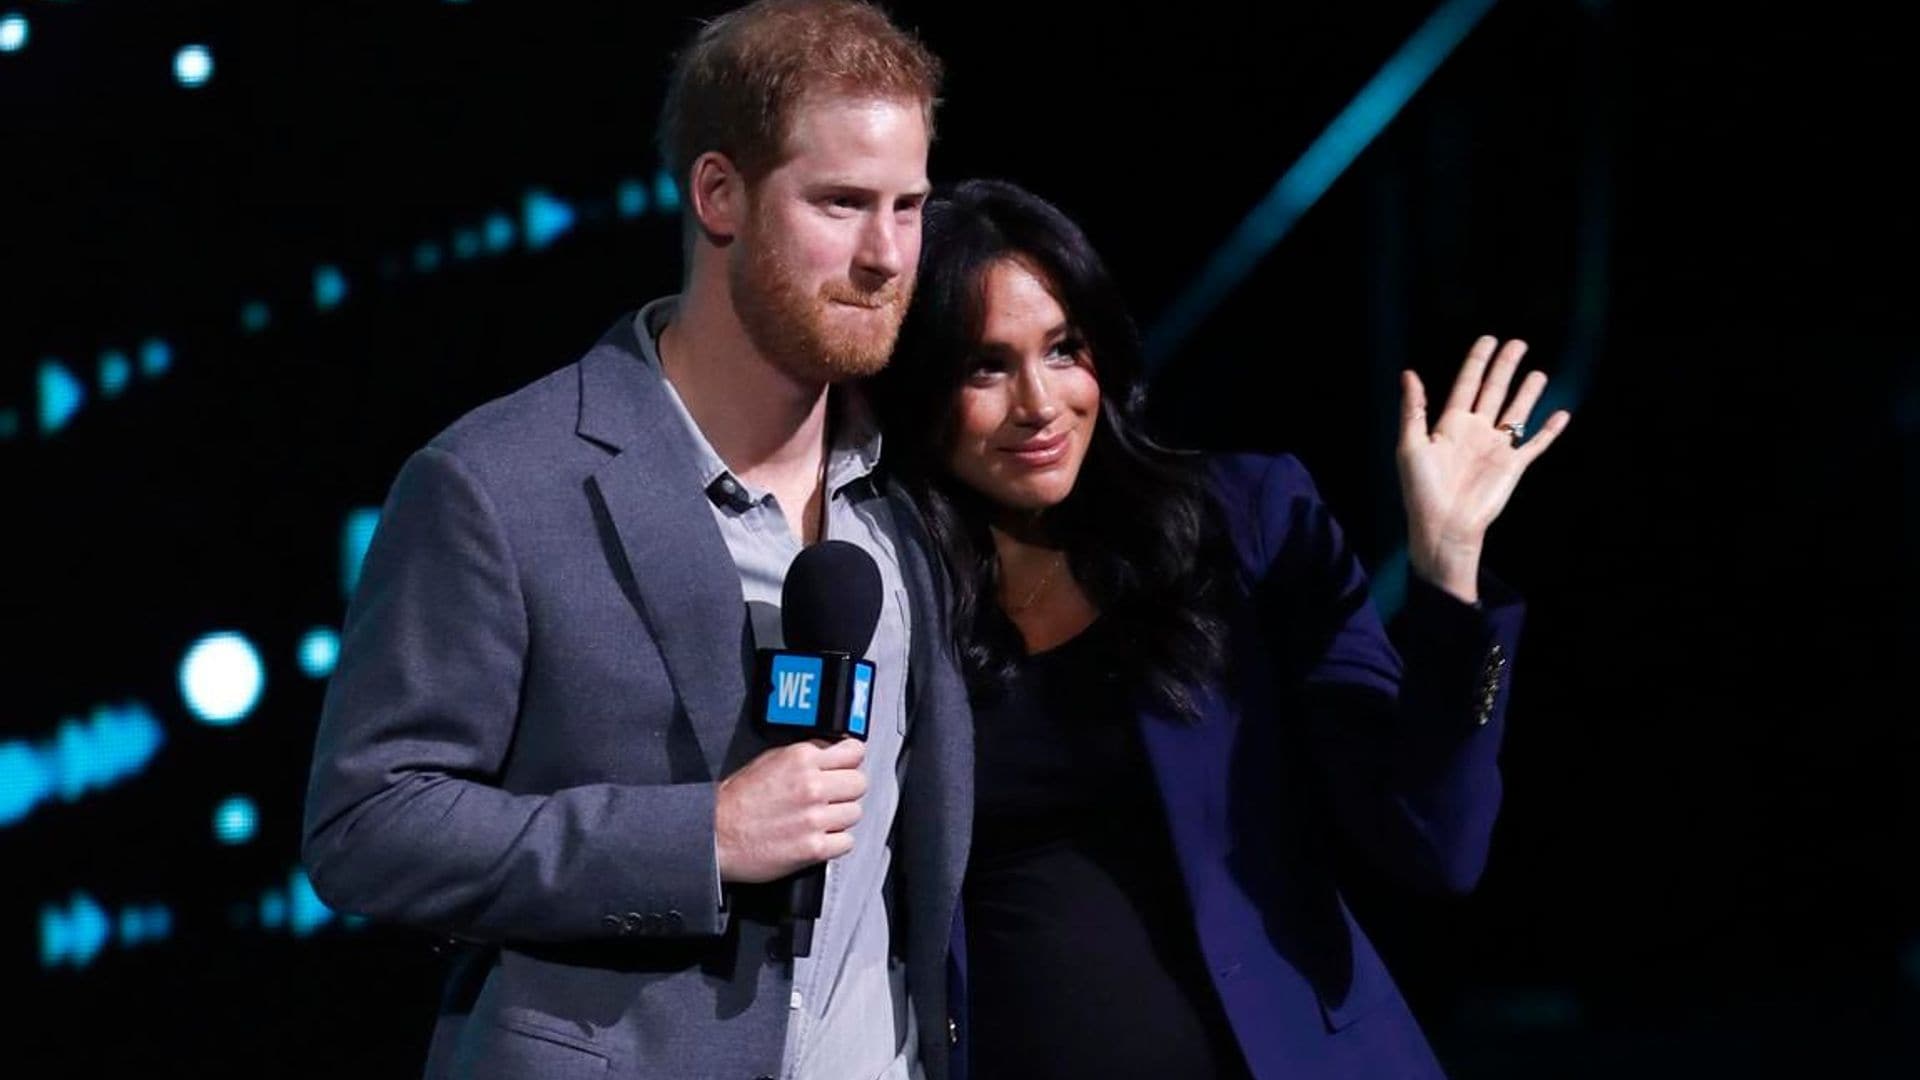 Meghan Markle and Prince Harry stepping down from senior royal roles